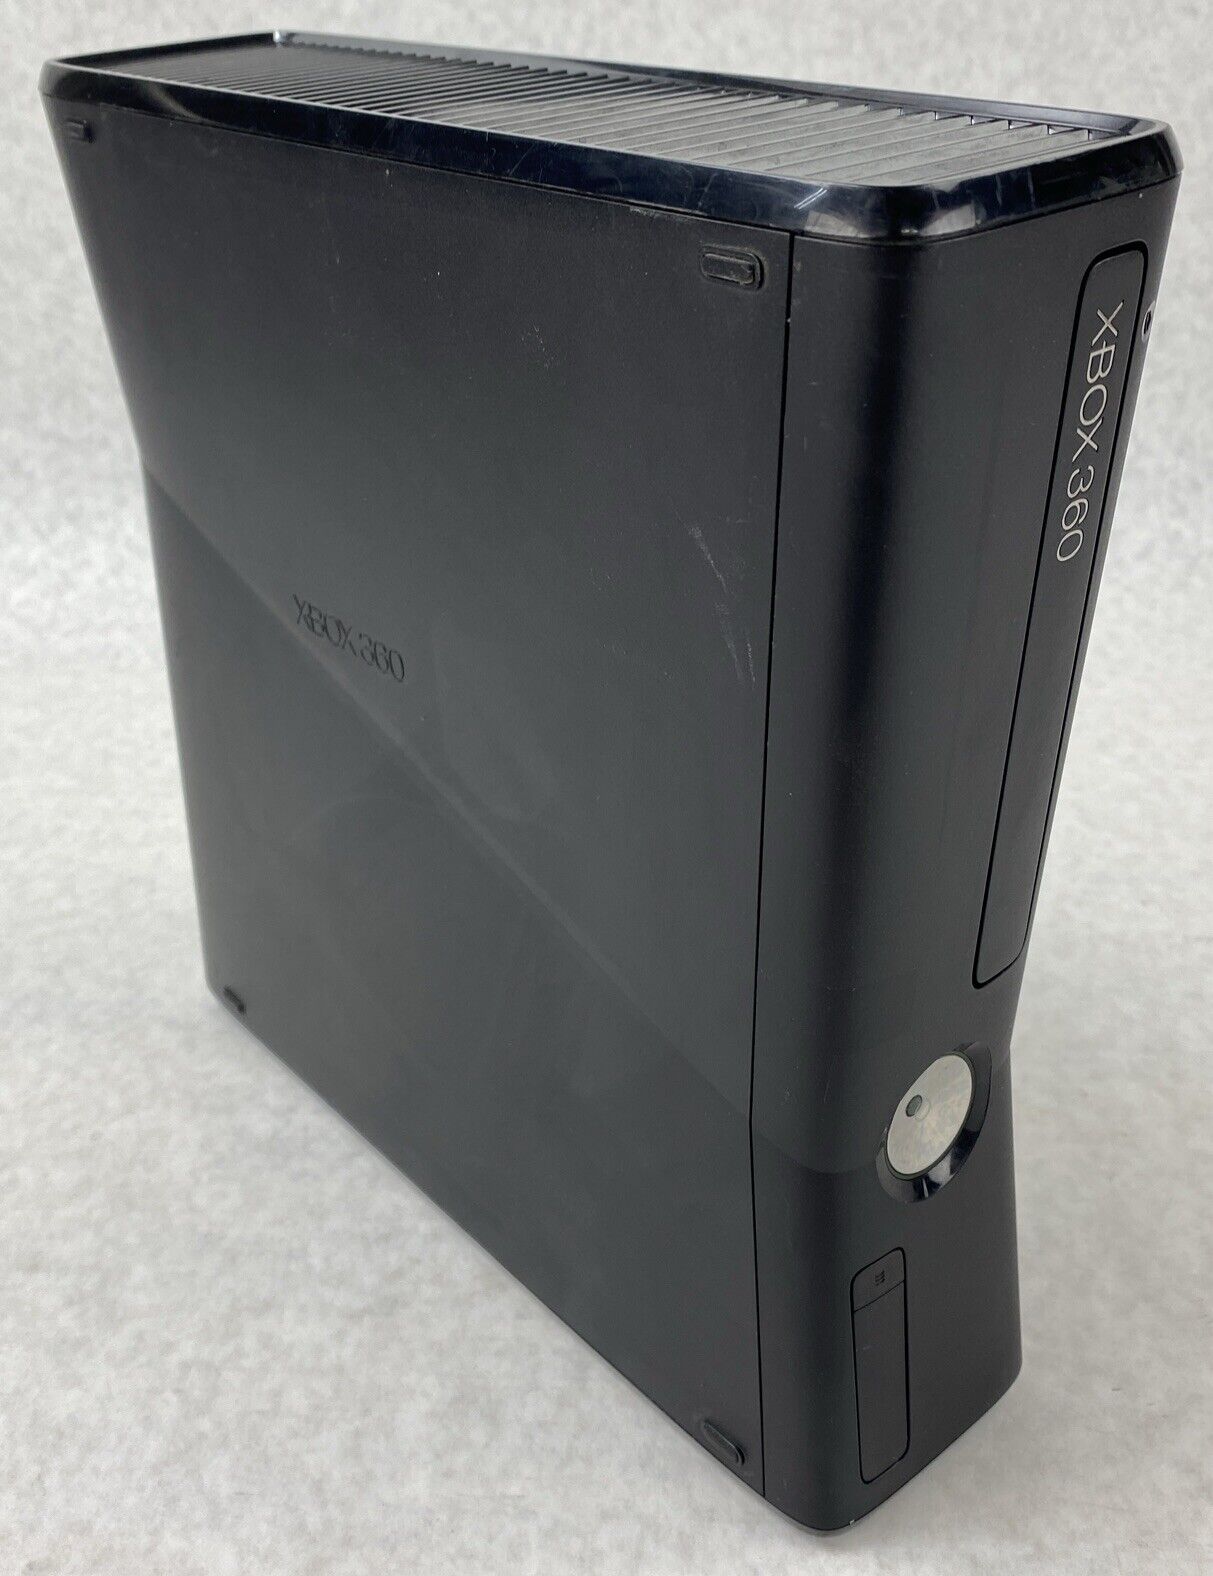 Microsoft 1439 Xbox 360 S Slim 124 GB Black System CONSOLE ONLY Tested